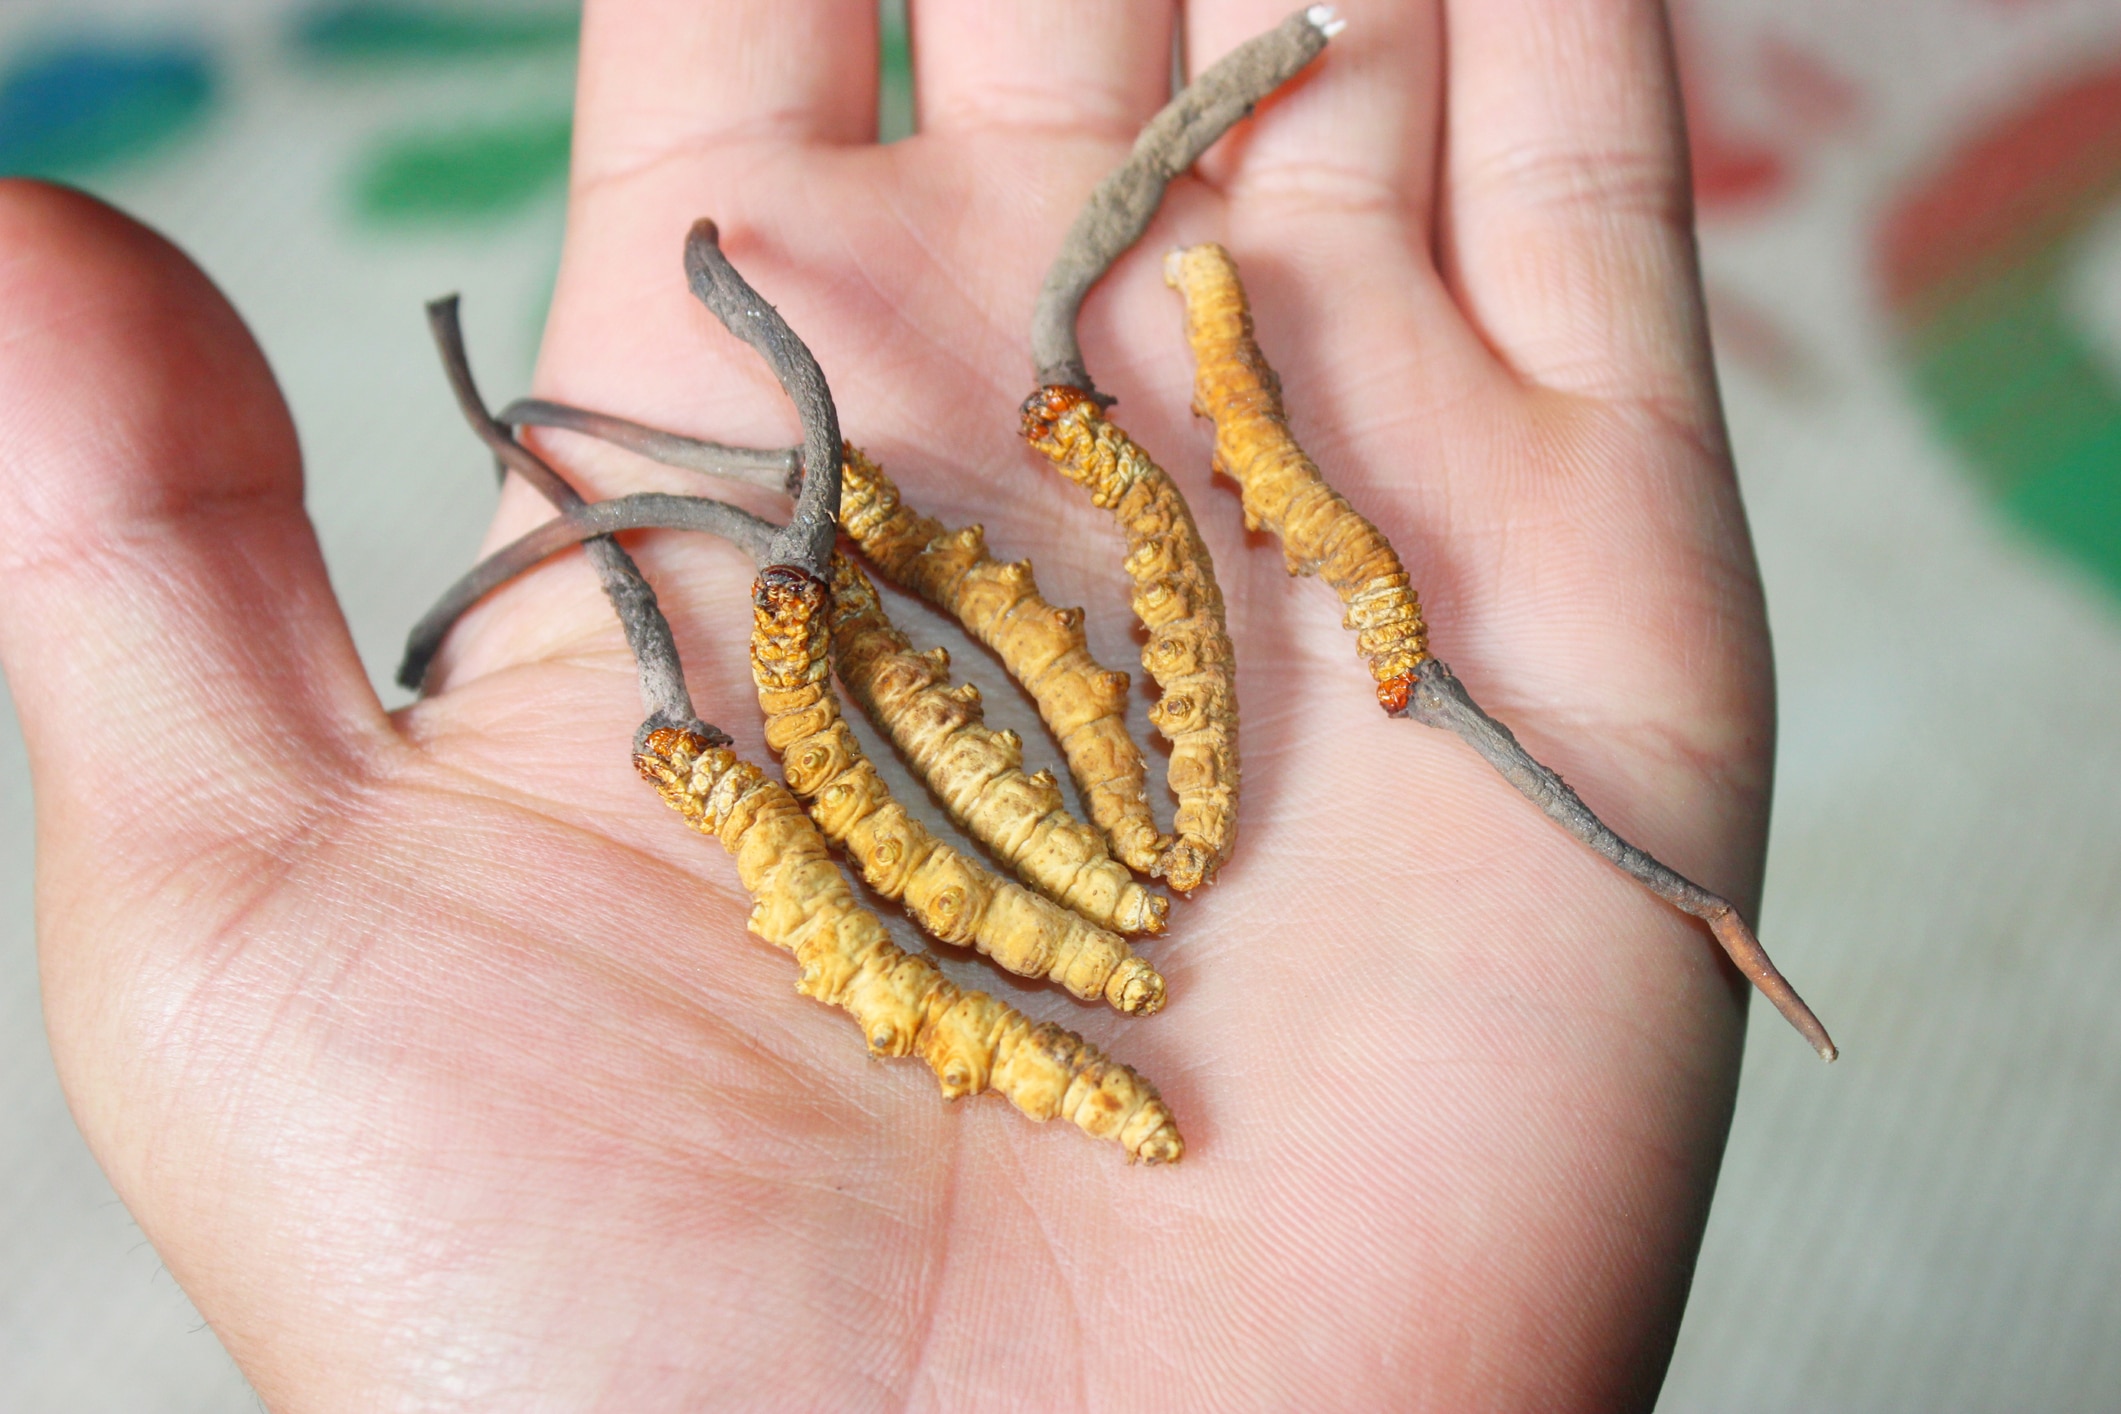 Closeup of Ophiocordyceps sinensis, Yarsagumba/Keeda jadi in hand, This is a high value Traditional herb found in higher altitudes of himalaya regions in nepal, china and india.